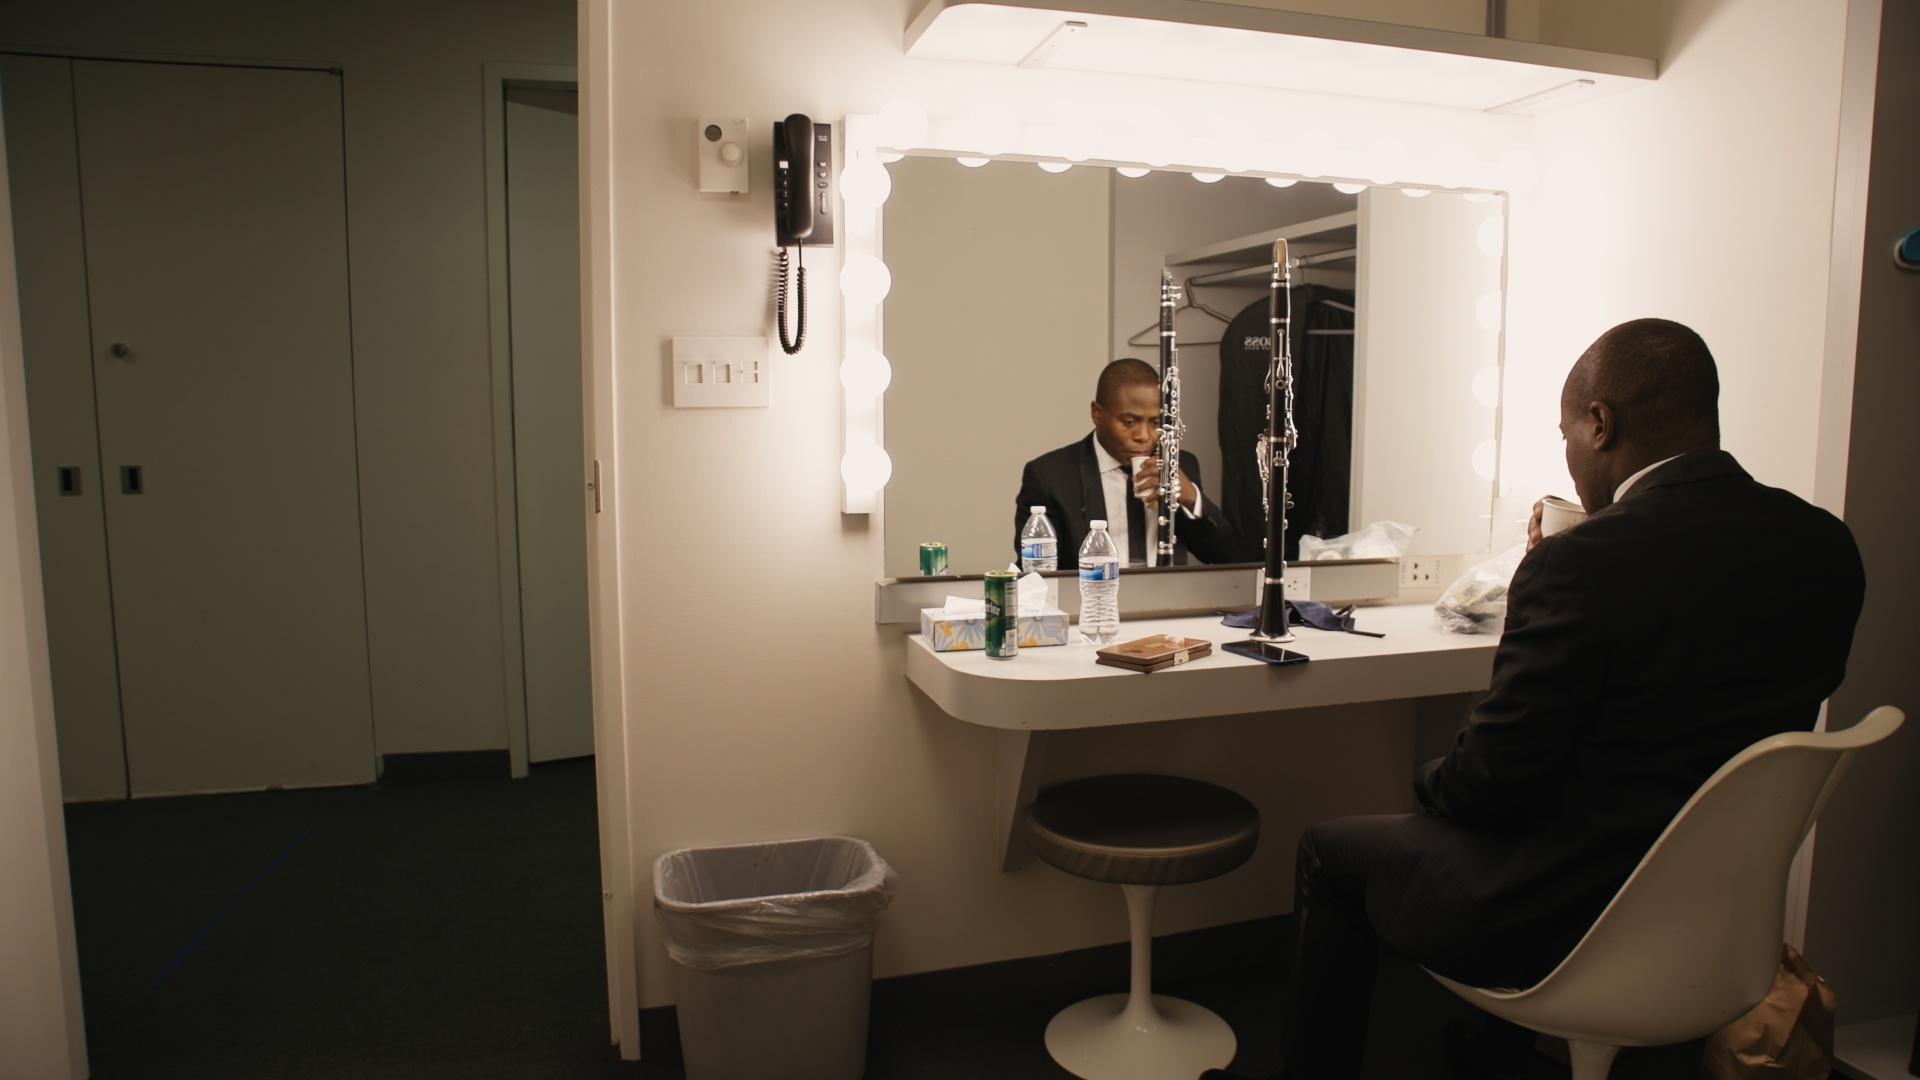 Chamber Music Society of Lincoln Center clarinetist Anthony McGill prepares backstage. 